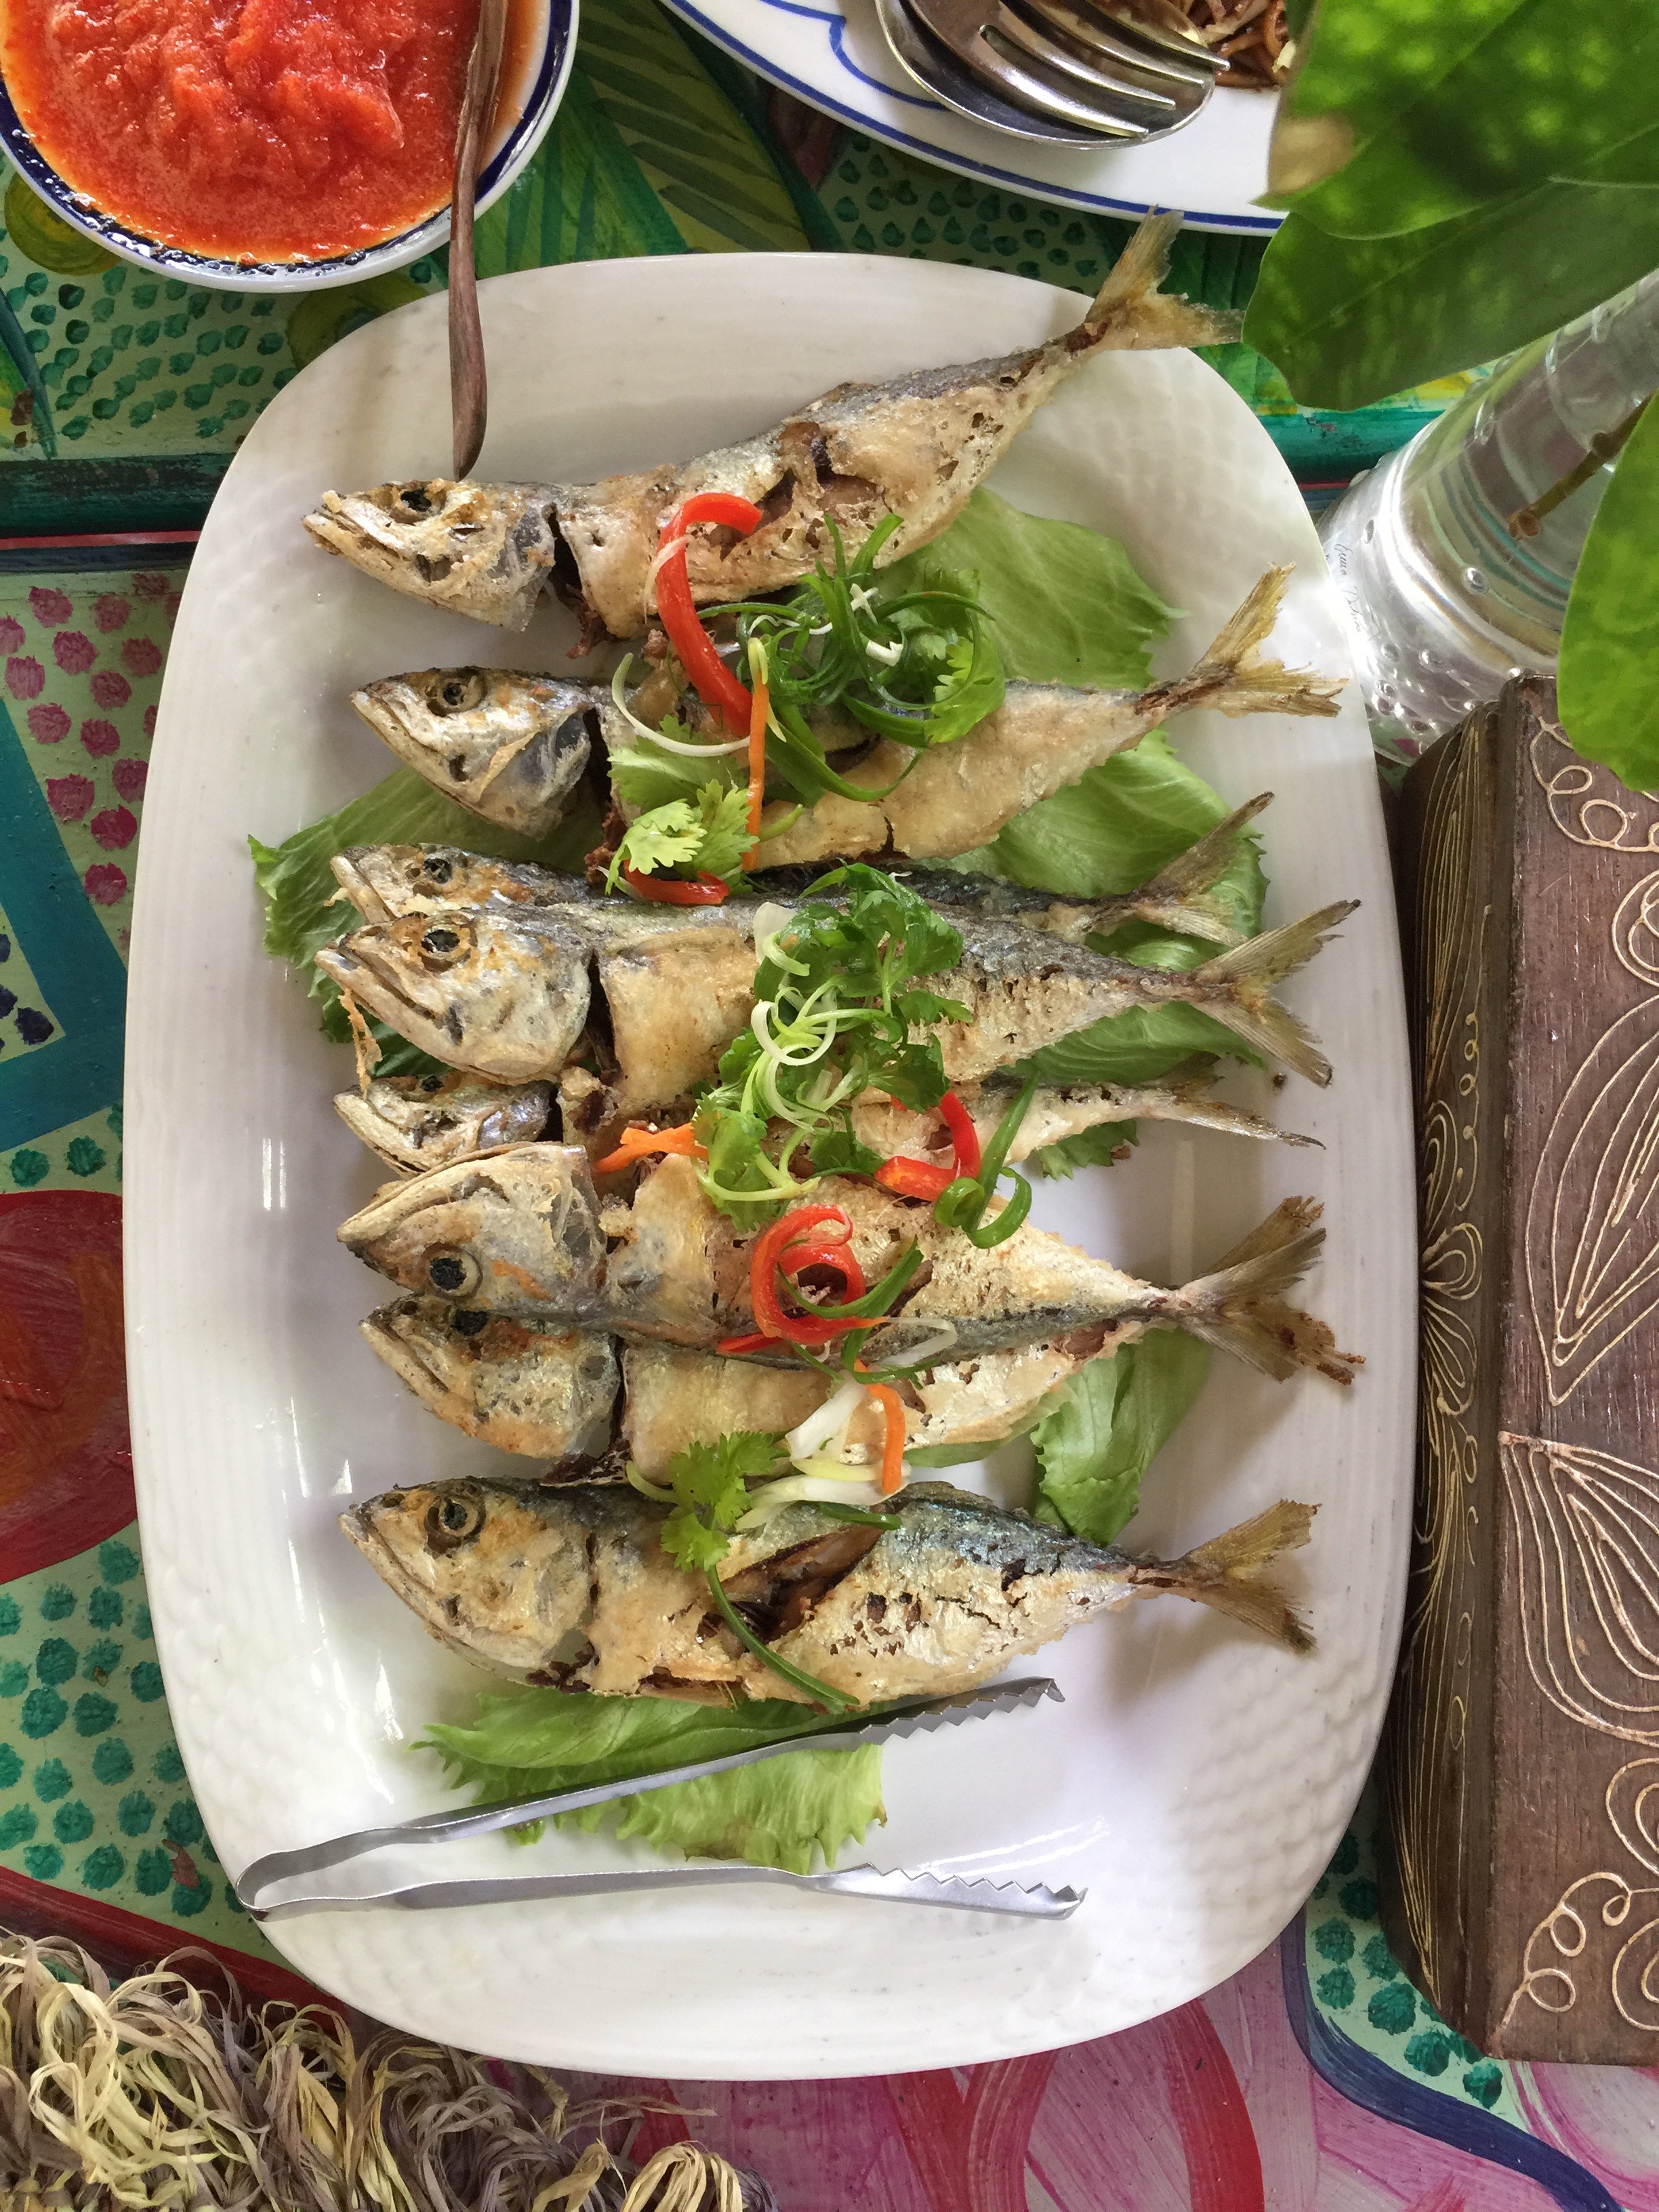 Fresh fish cooked simply local Malaysian style